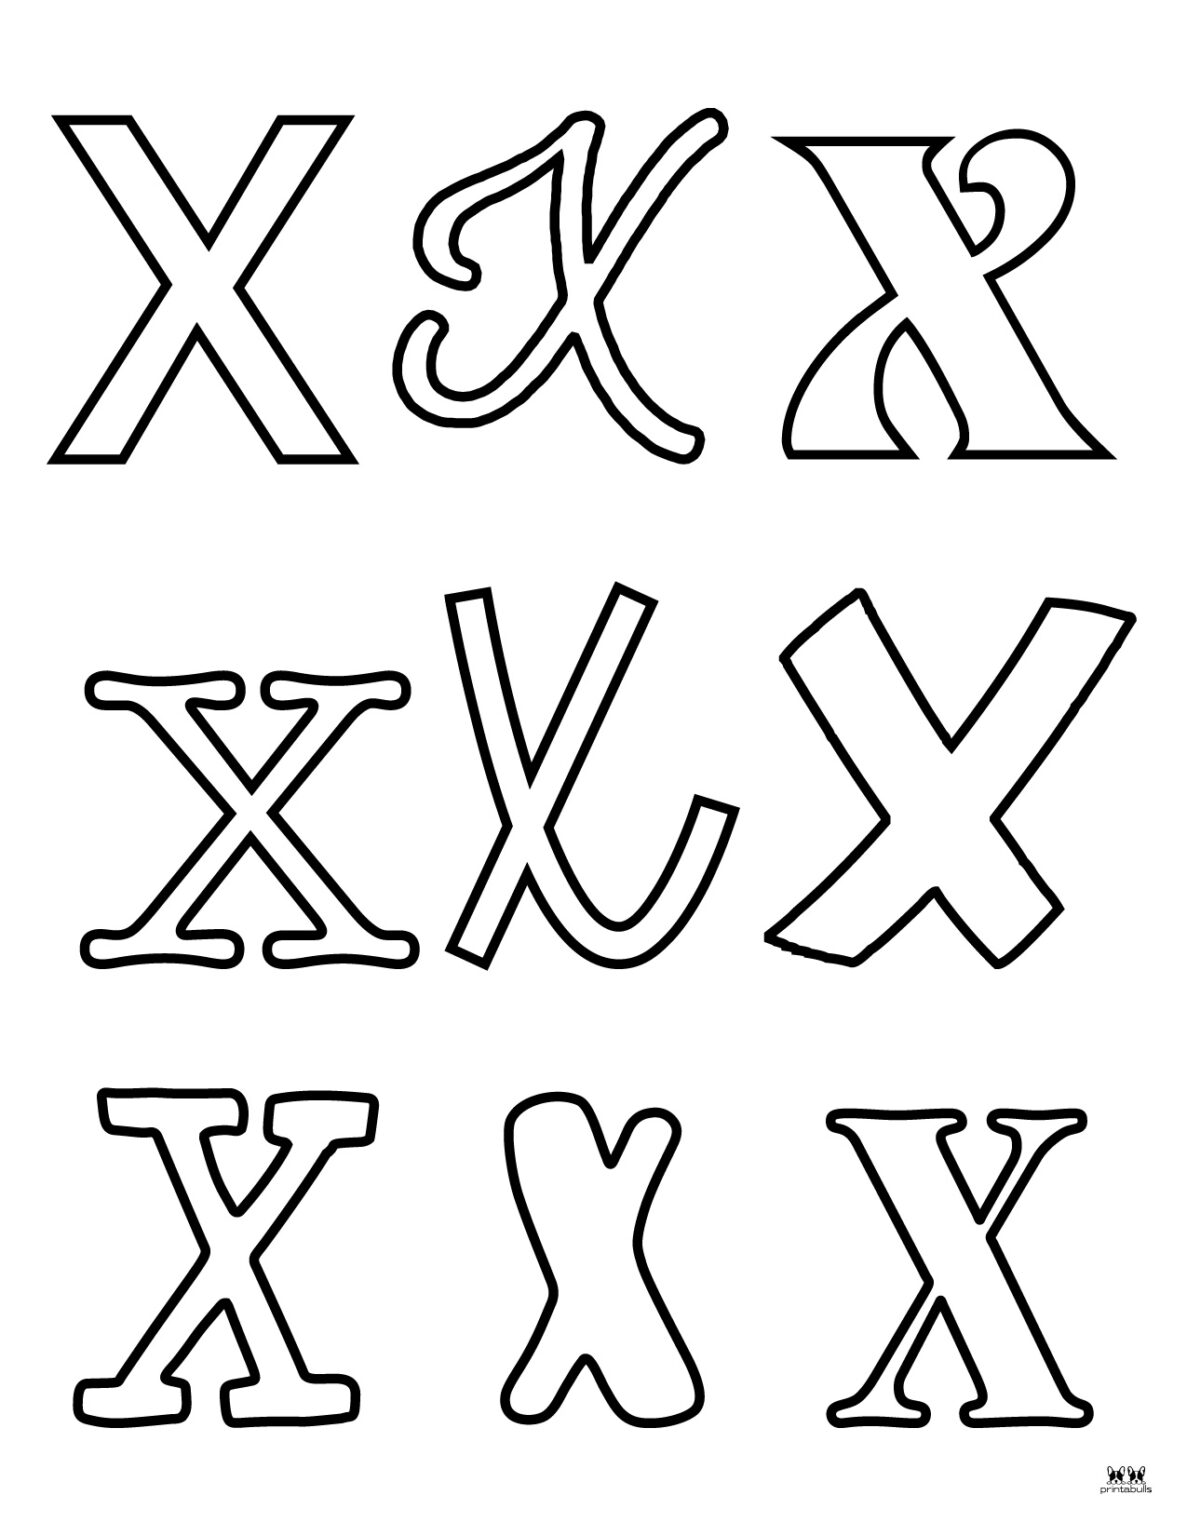 kids-under-7-letter-x-worksheets-and-coloring-pages